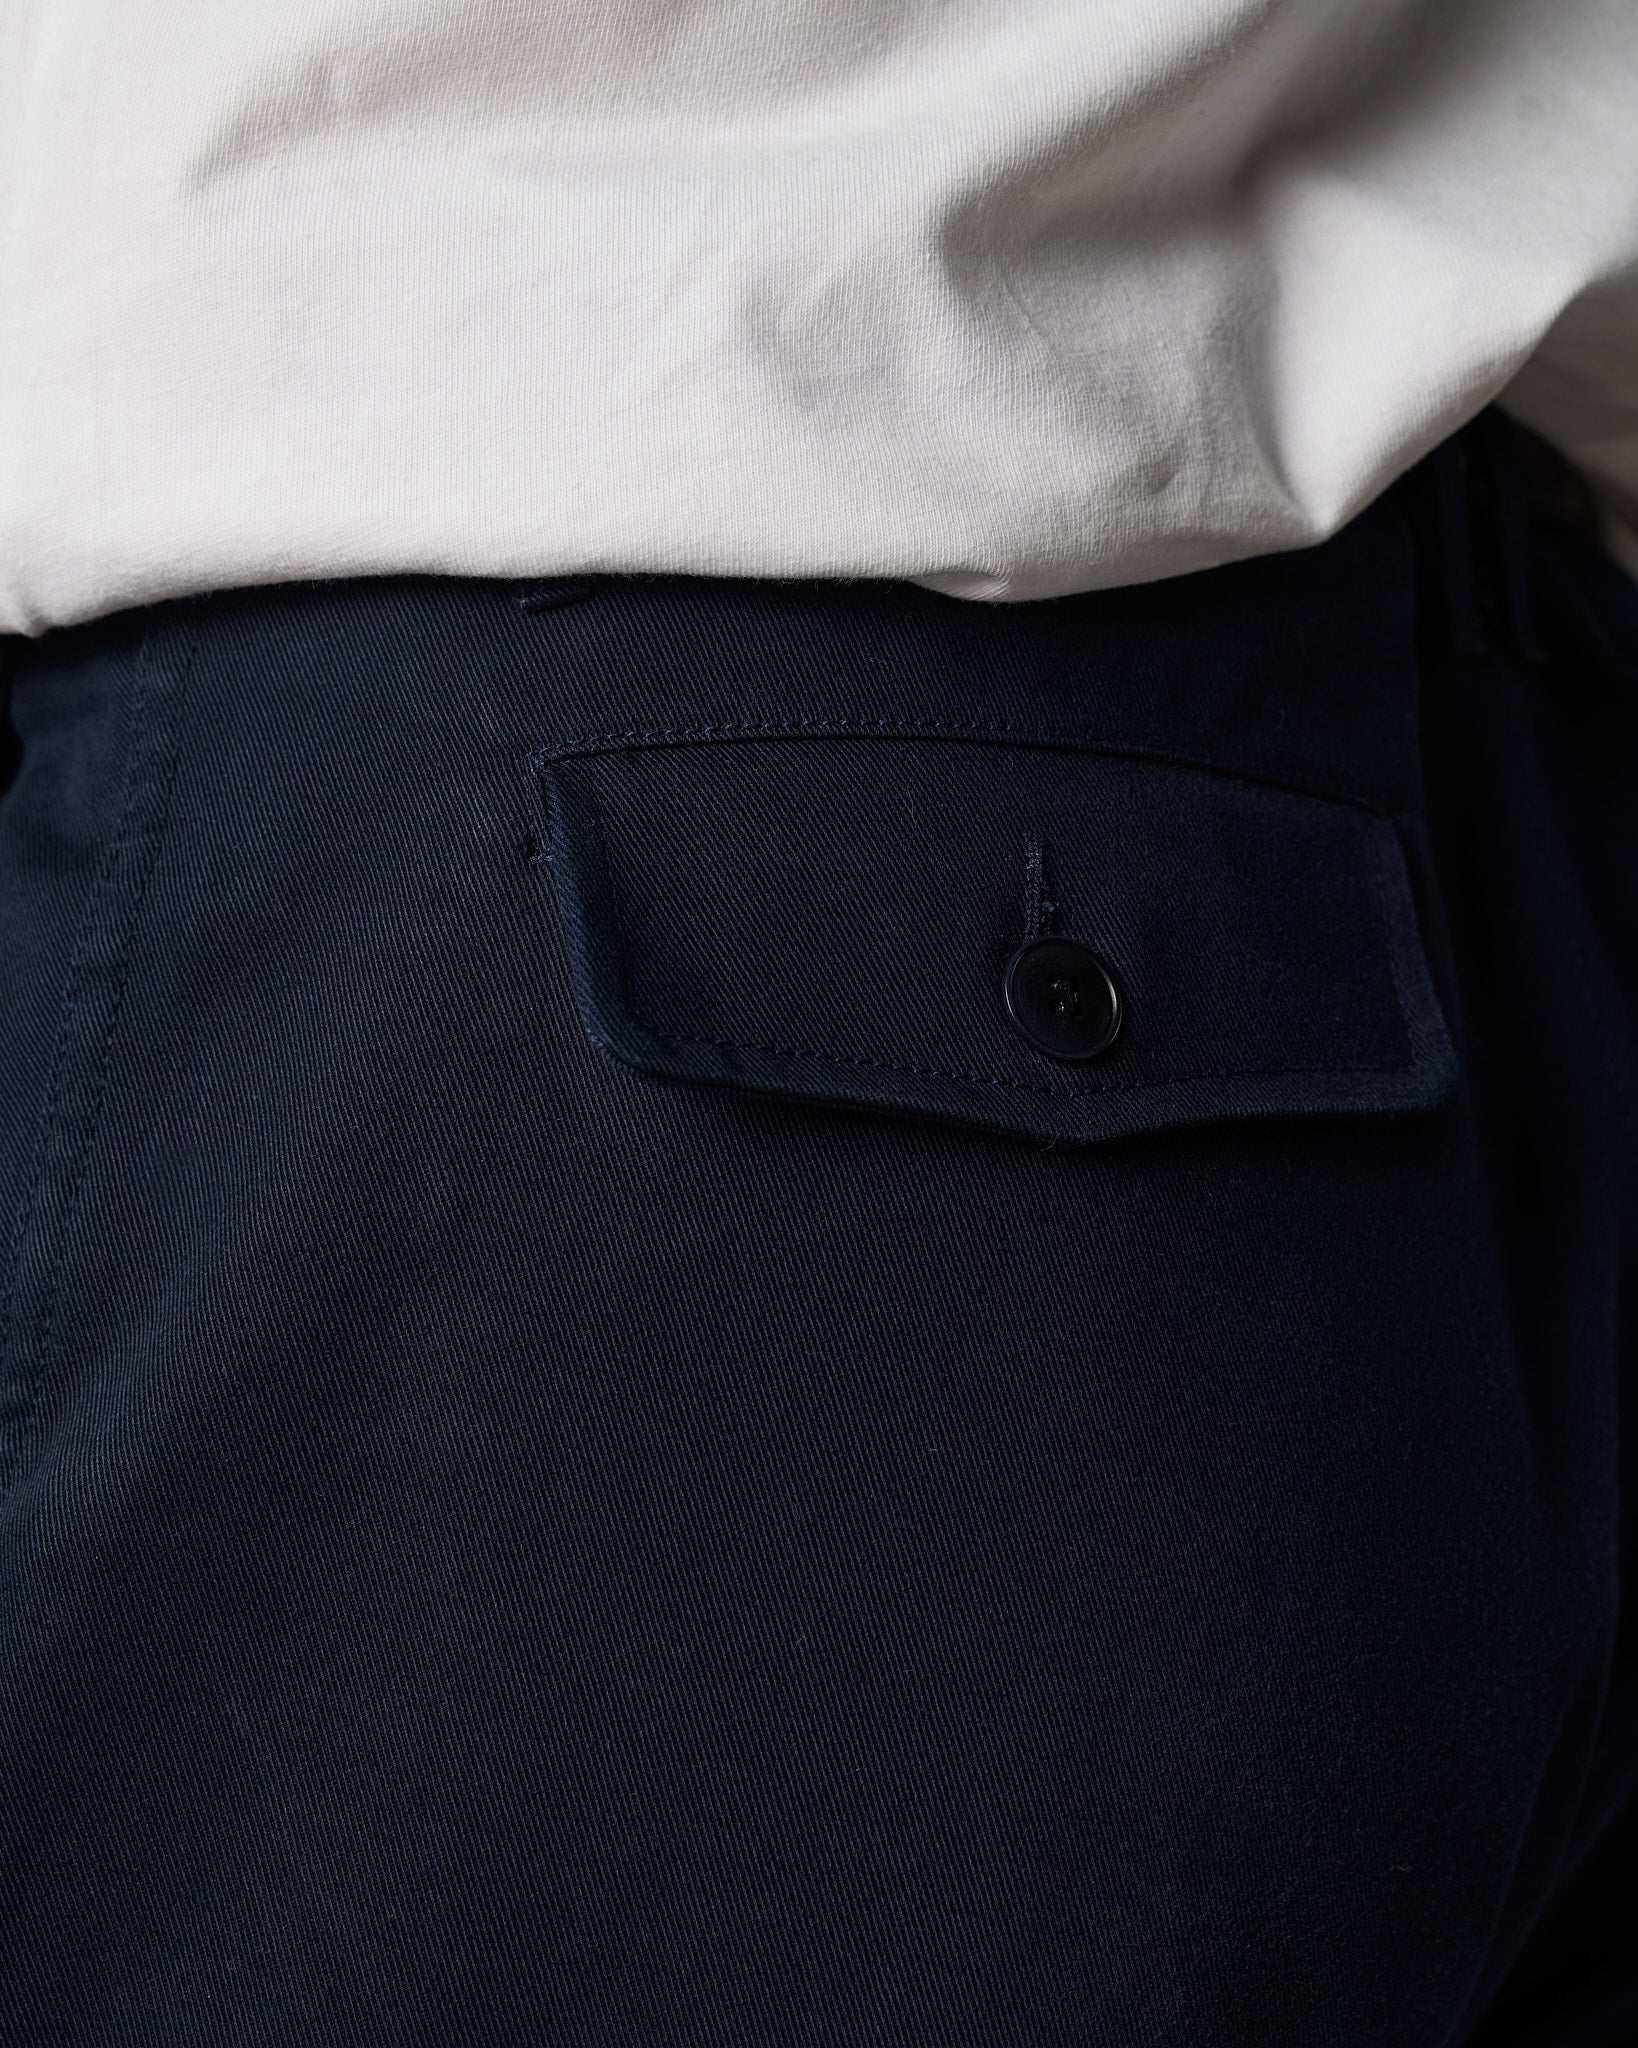 T140 Army Chino - French Navy